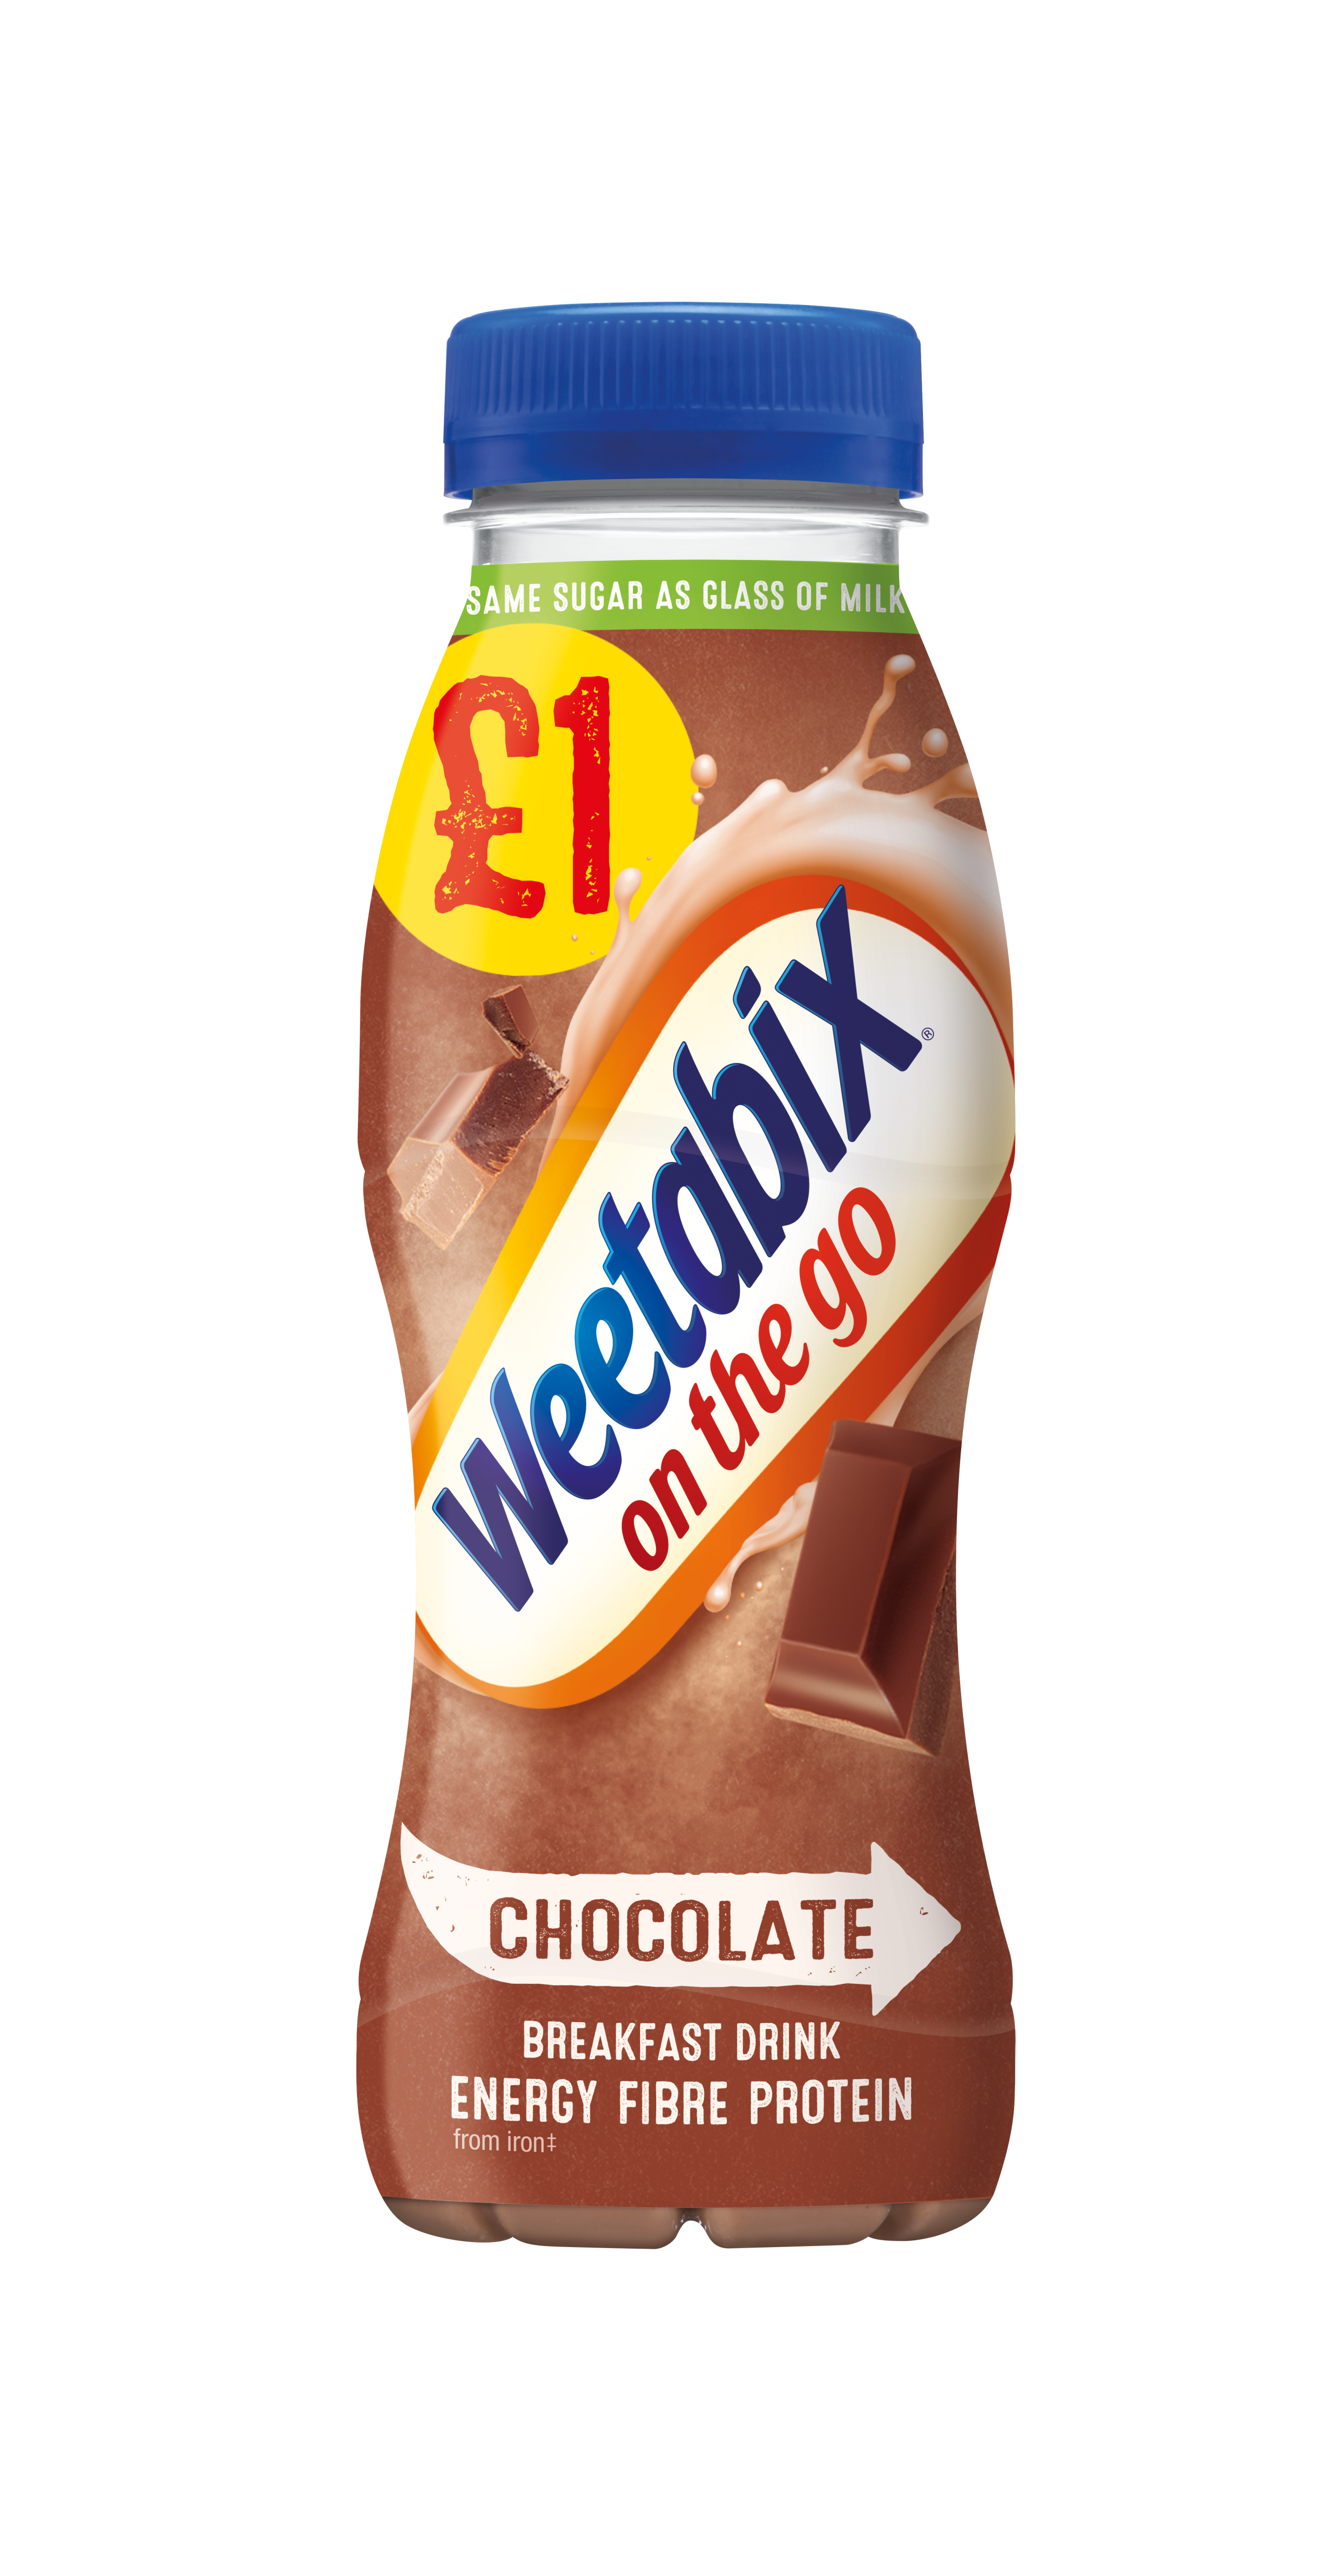 Weetabix On The Go brings back £1 PMP offer